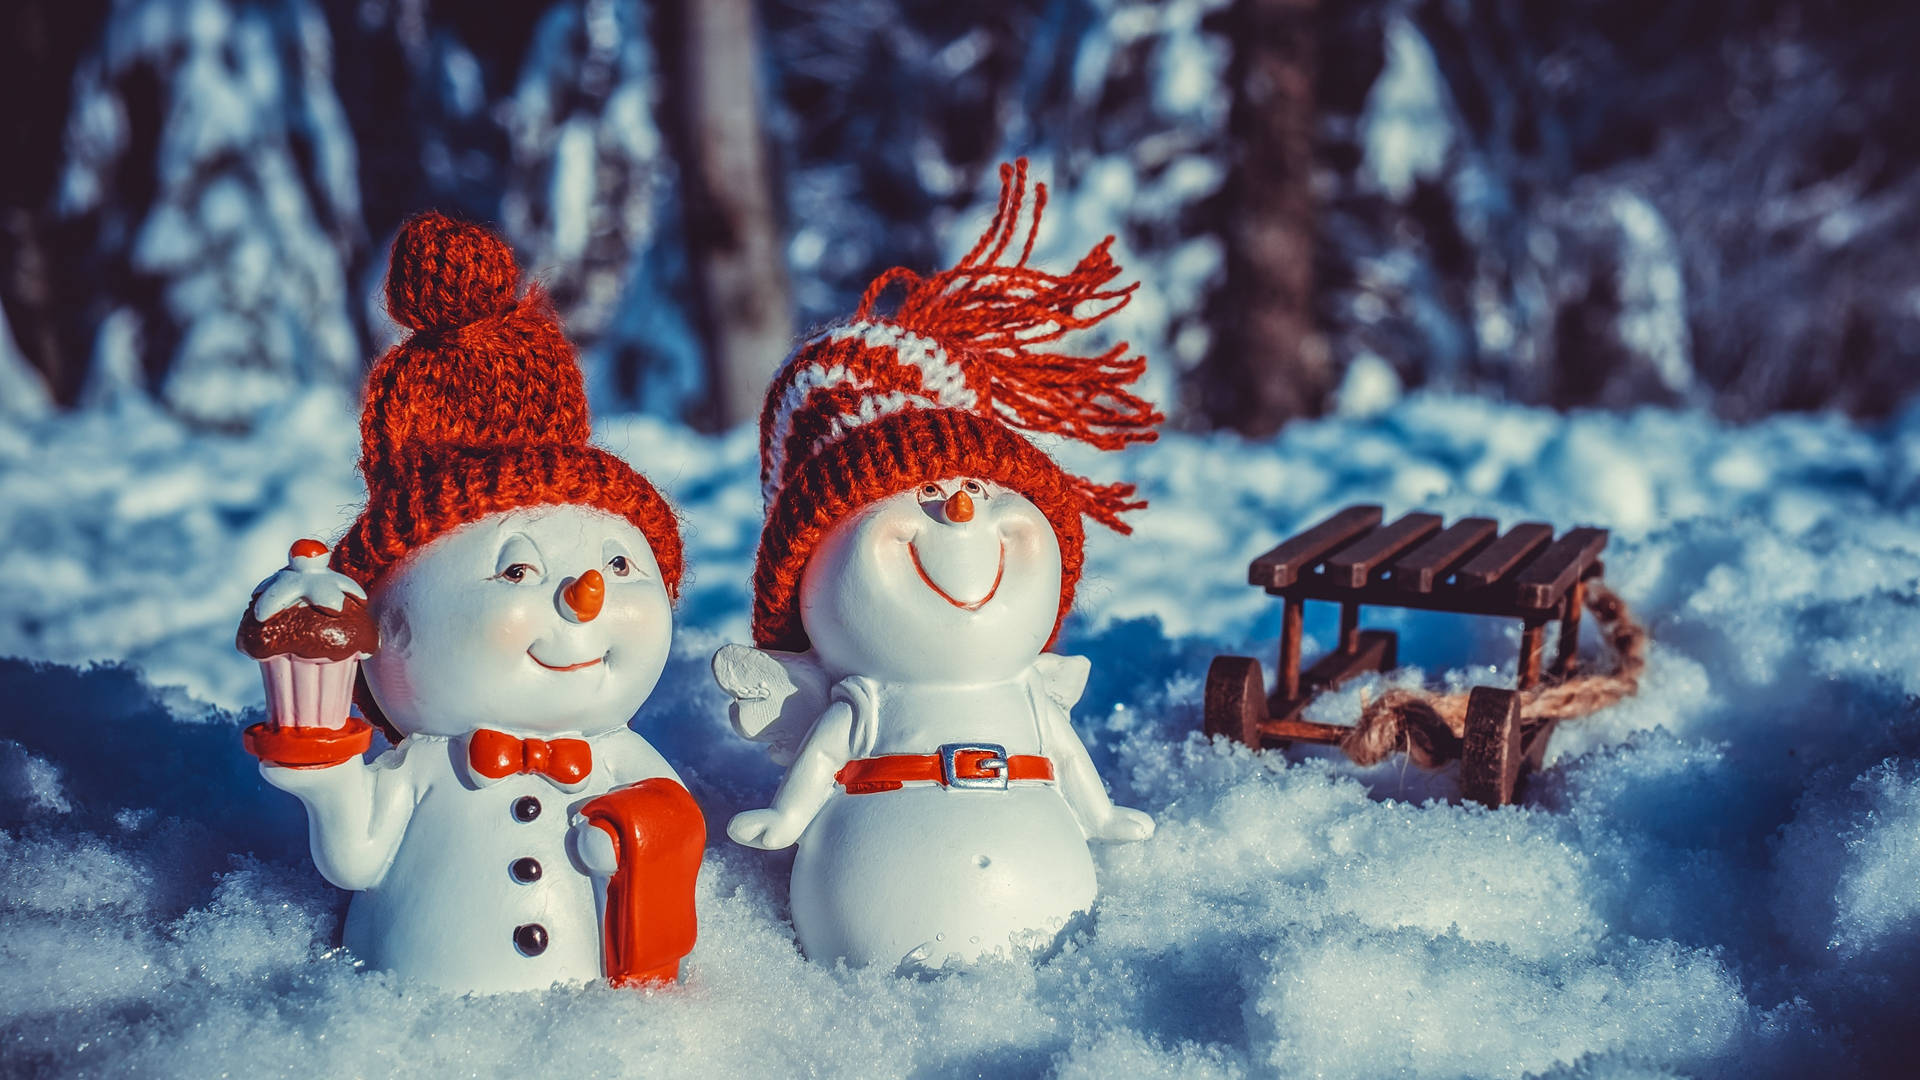 Celebrate Christmas with a snow-filled winter wonderland Wallpaper